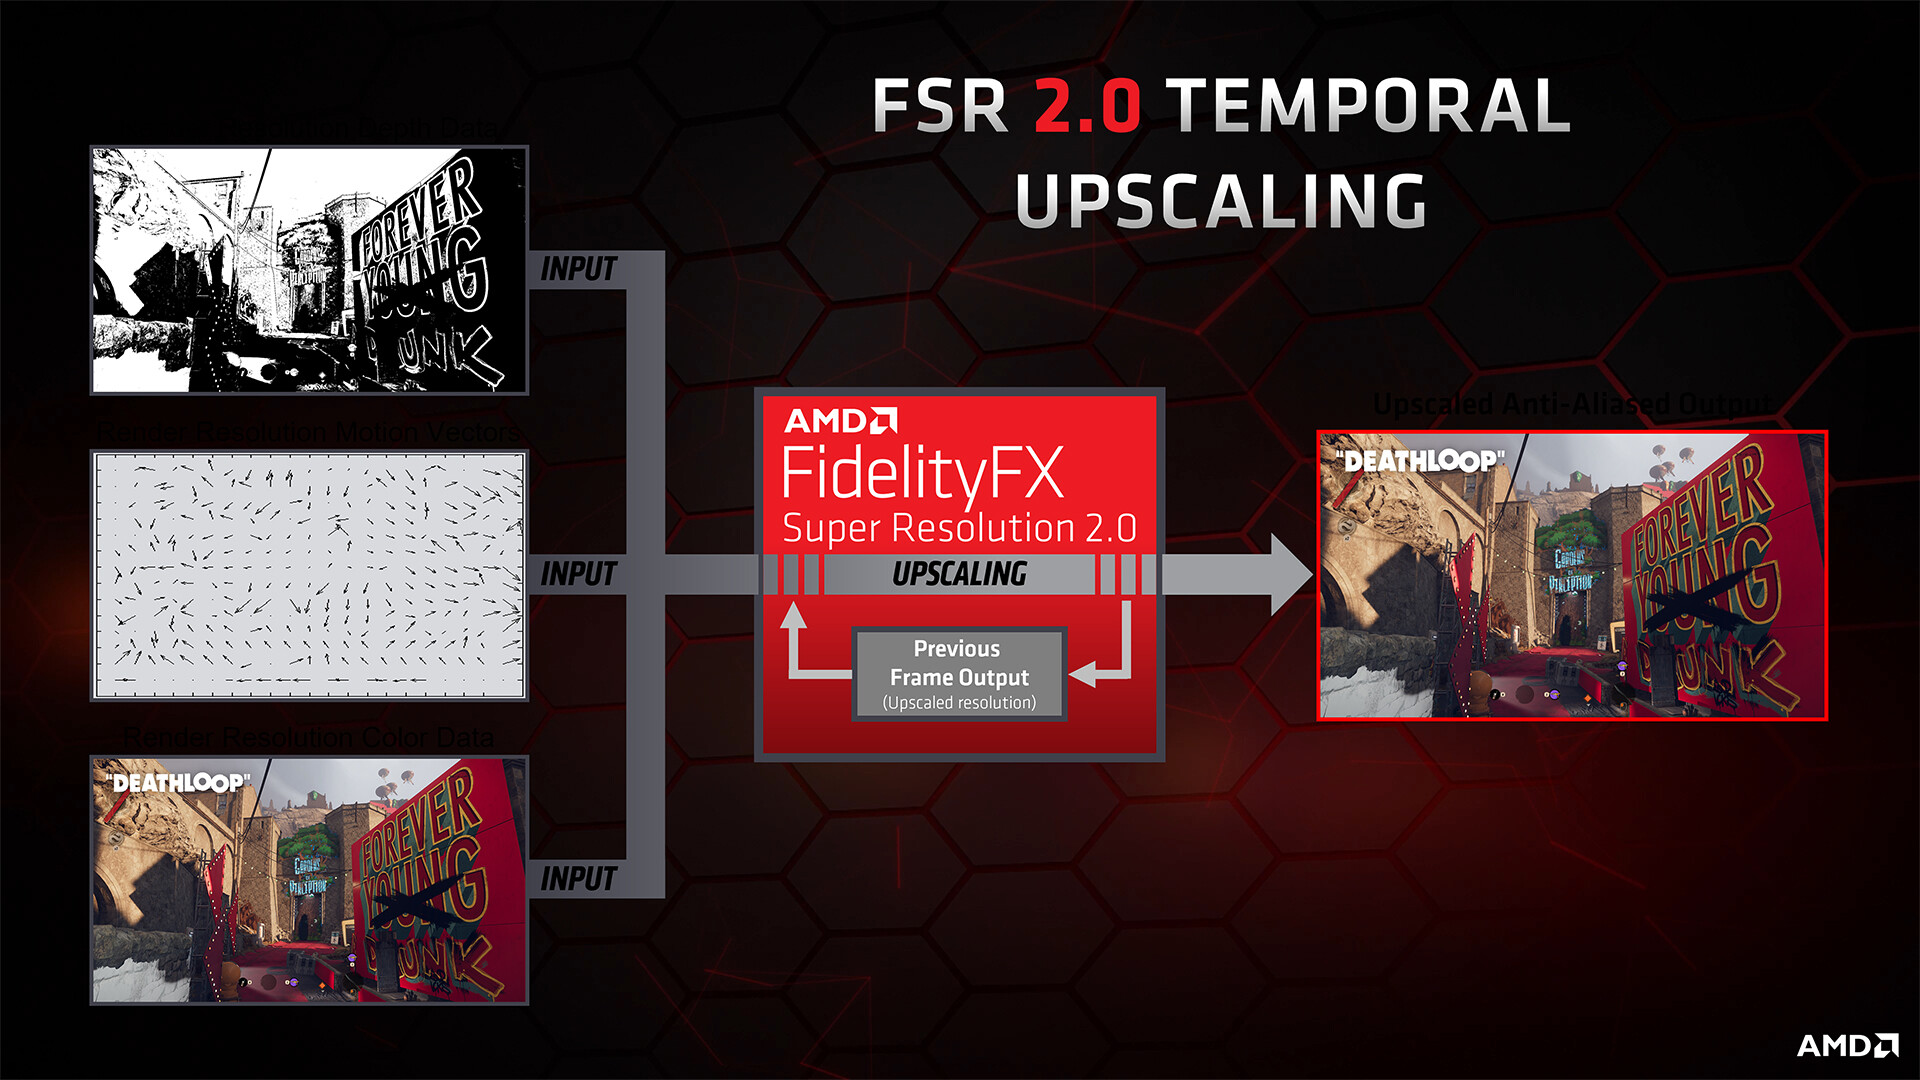 Media asset in full size related to 3dfxzone.it news item entitled as follows: AMD rilascia il driver grafico Software: Adrenalin Edition 22.3.1 per FSR 2.0 | Image Name: news33094_AMD-FidelityFX-Super-Resolution_3.jpg